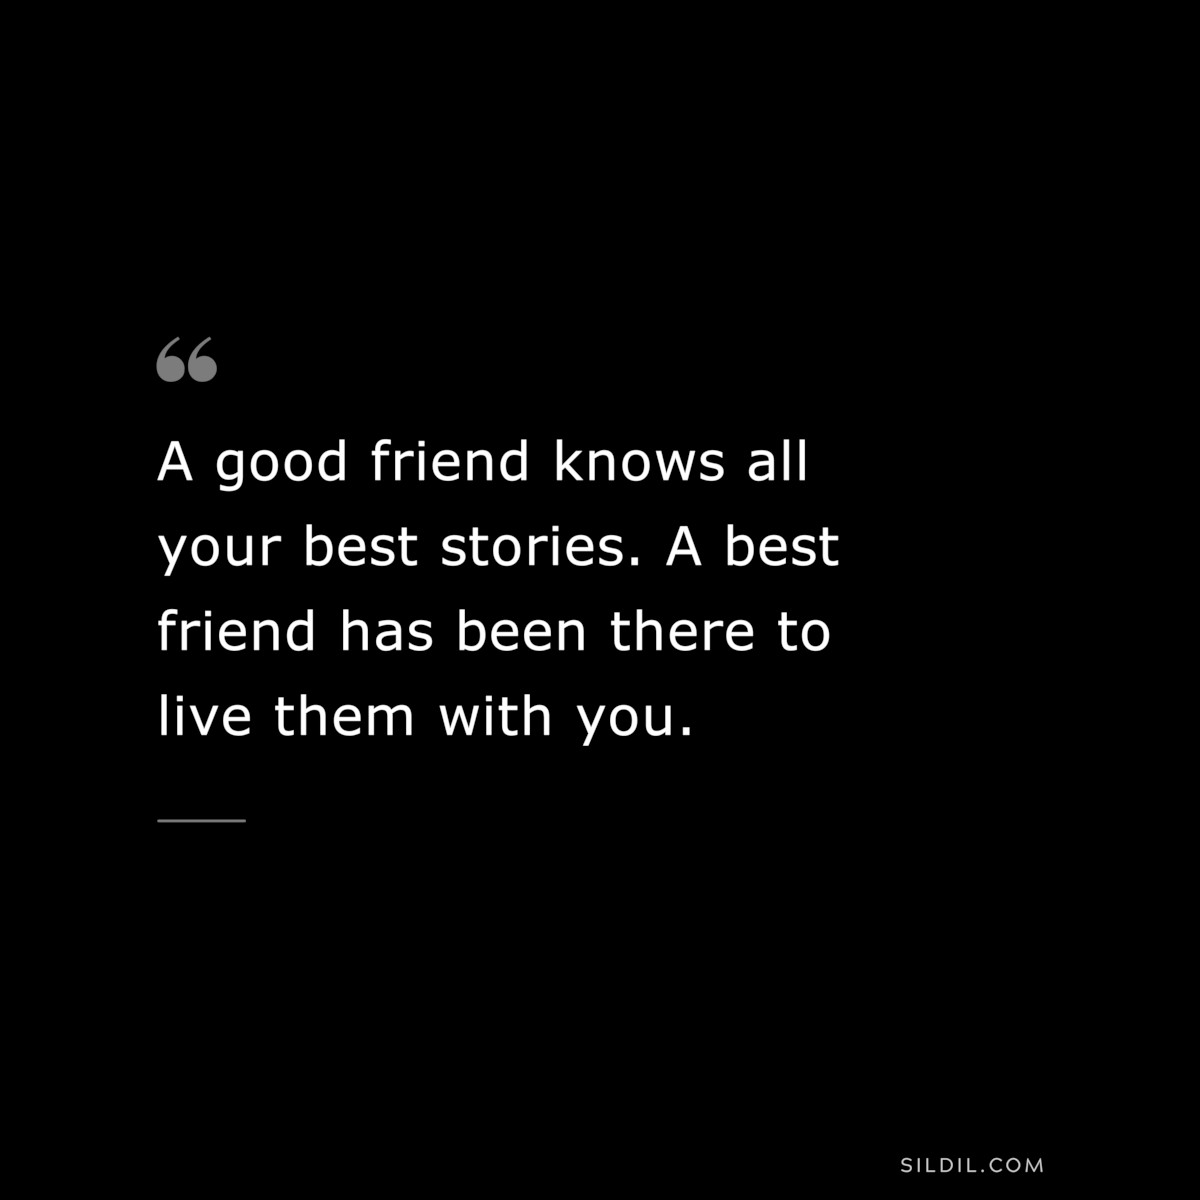 A good friend knows all your best stories. A best friend has been there to live them with you.